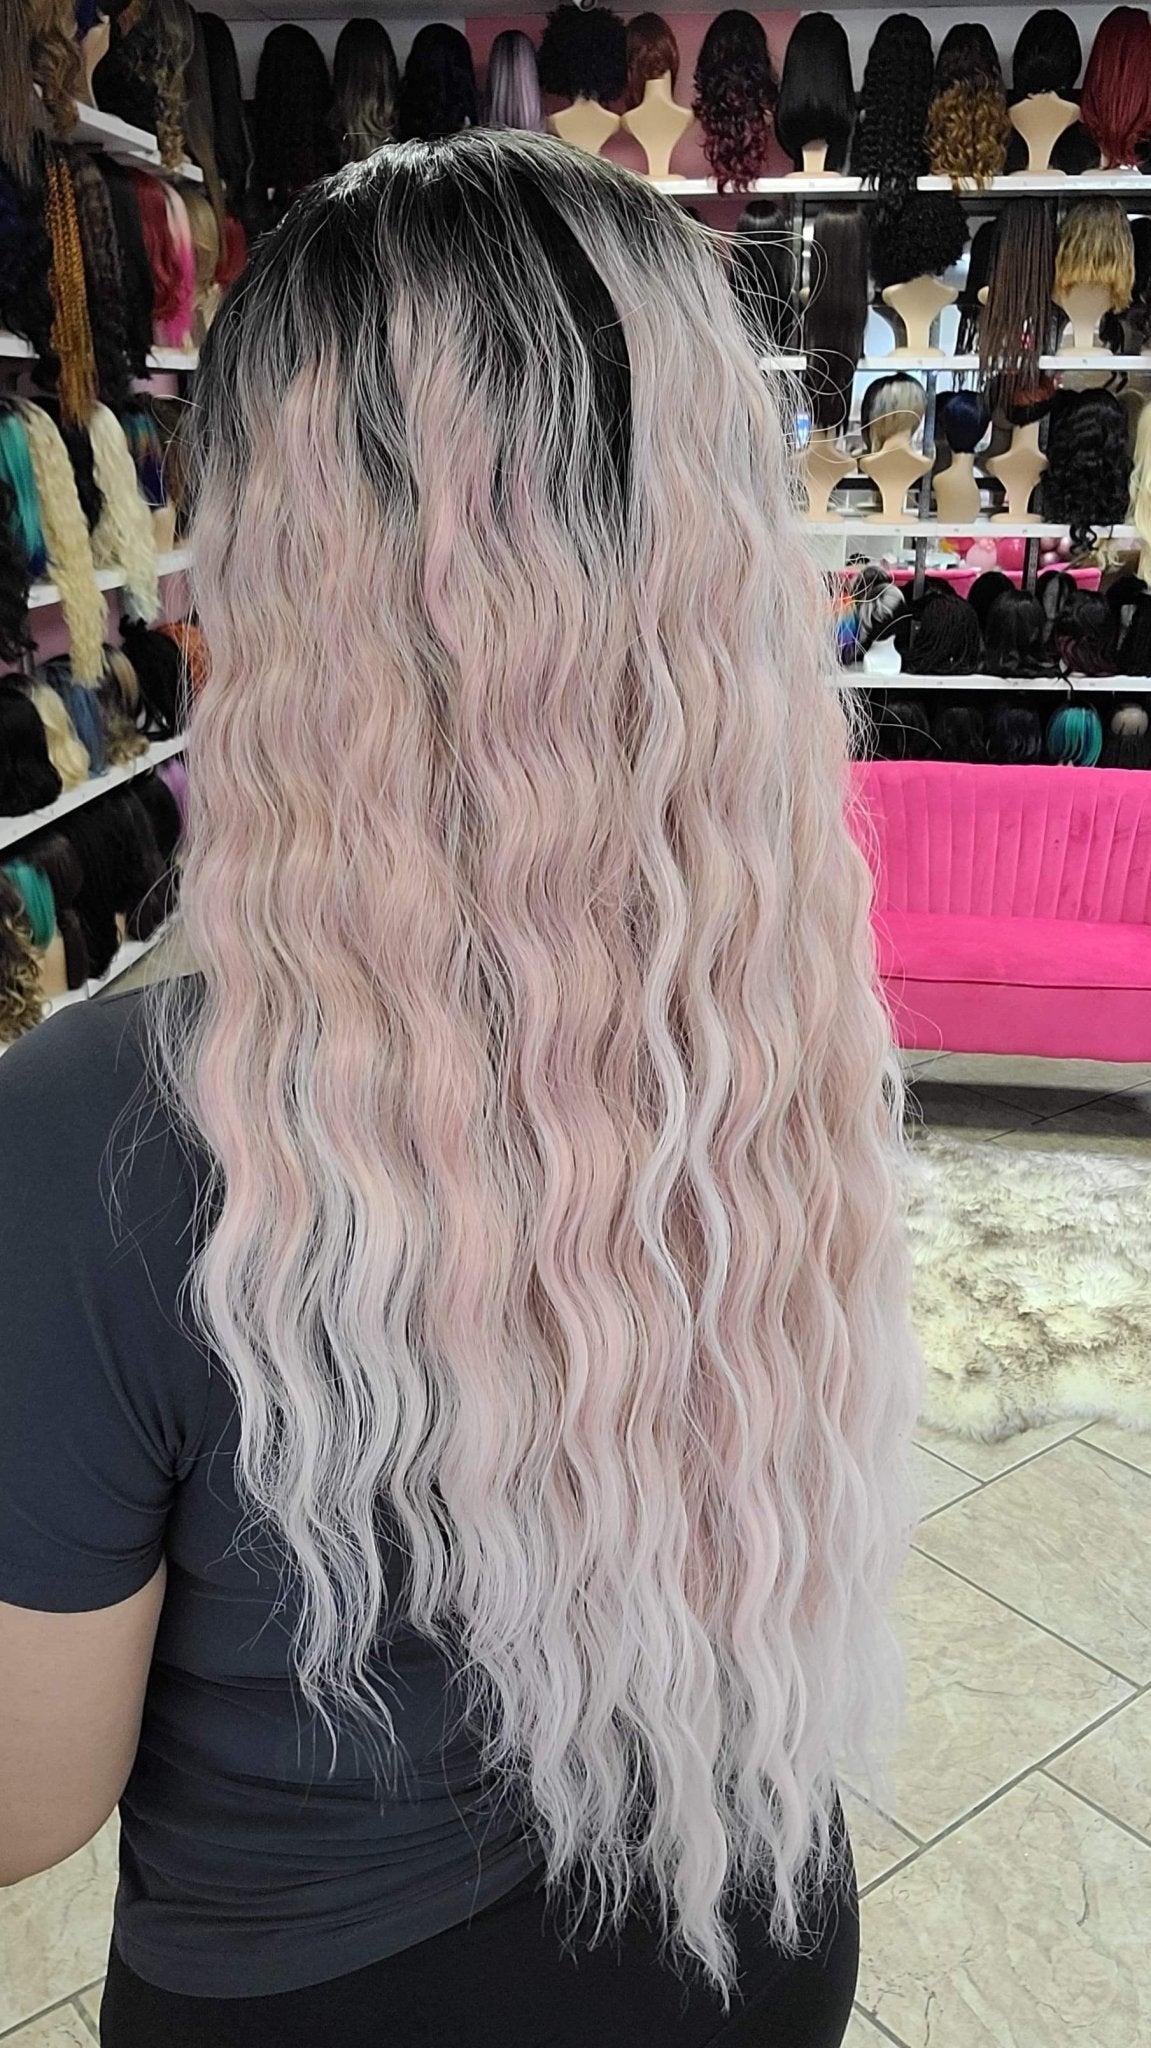 261 Brittney - Middle Part Lace Front Wig Human Hair Blend- PINK - DaizyKat Cosmetics 261 Brittney - Middle Part Lace Front Wig Human Hair Blend- PINK DaizyKat Cosmetics Wigs